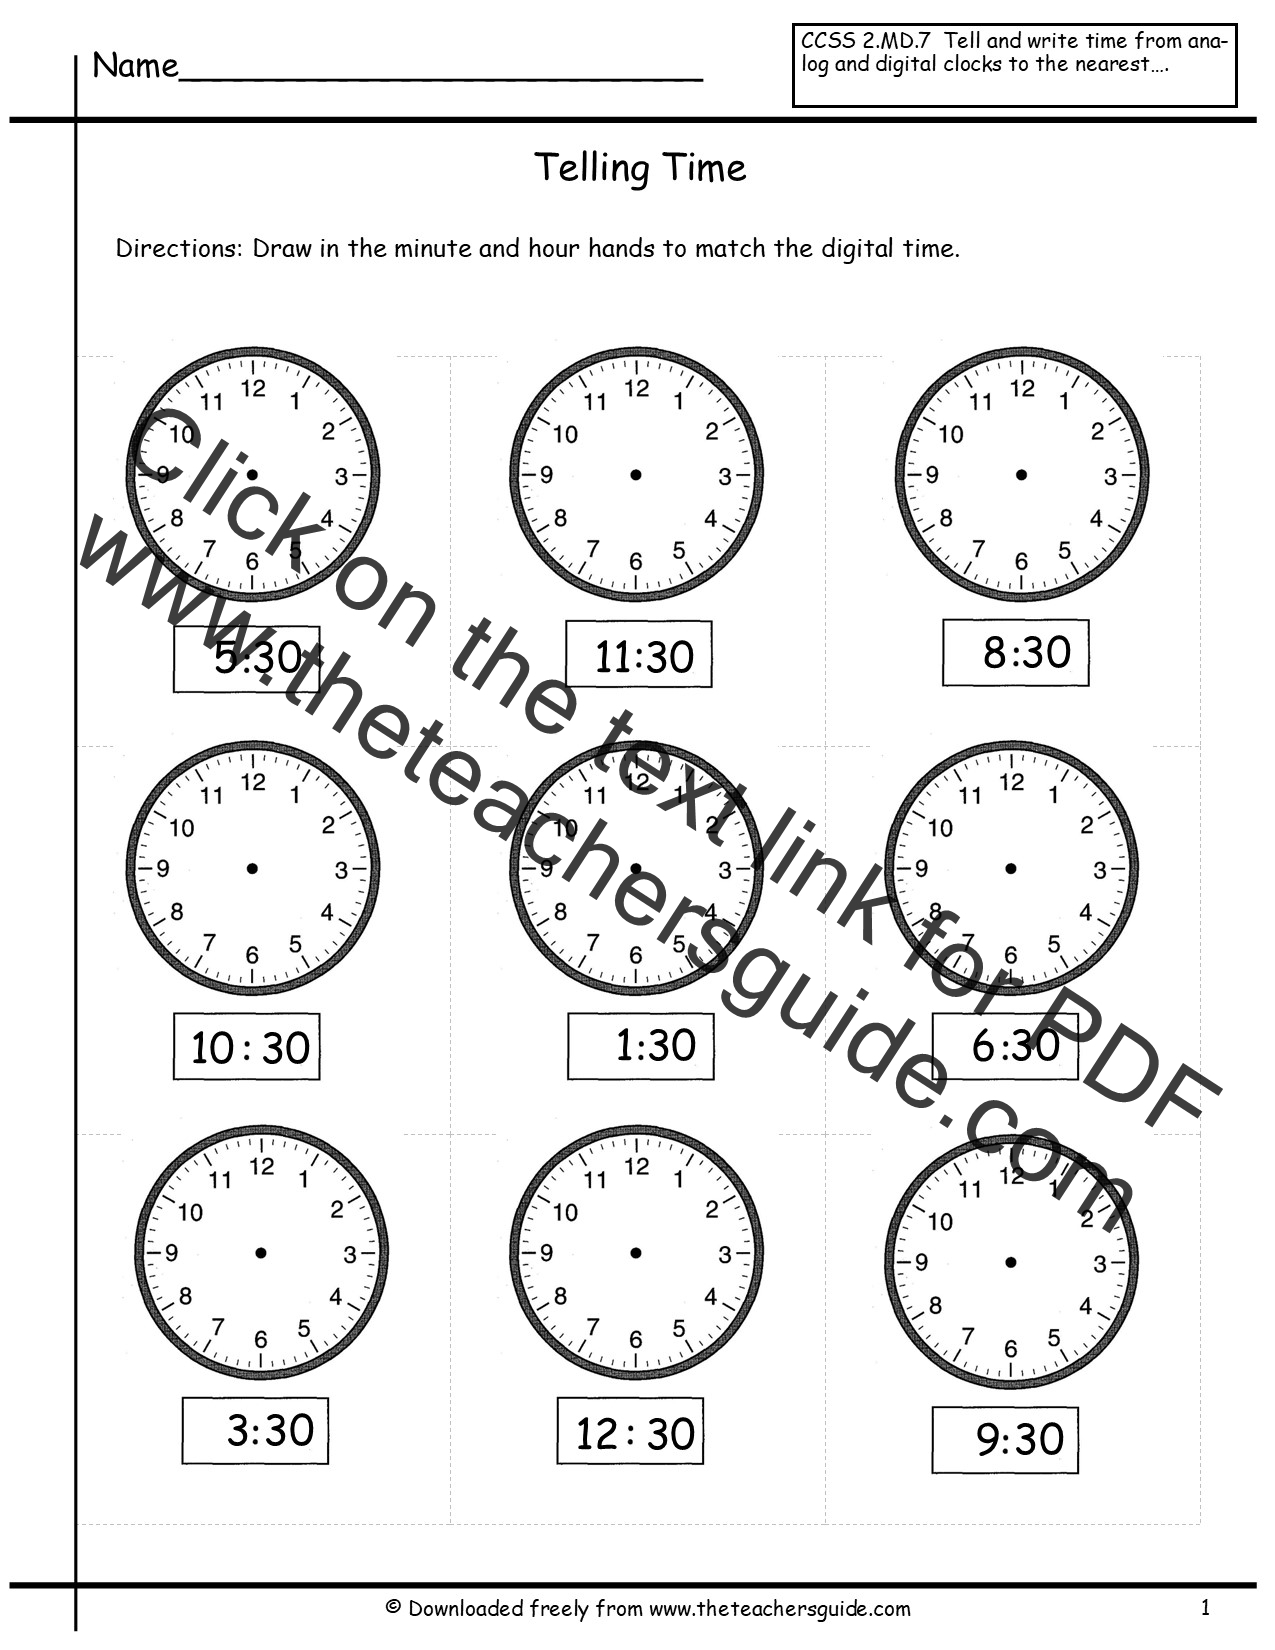 Telling Time Worksheets From The Teacher s Guide